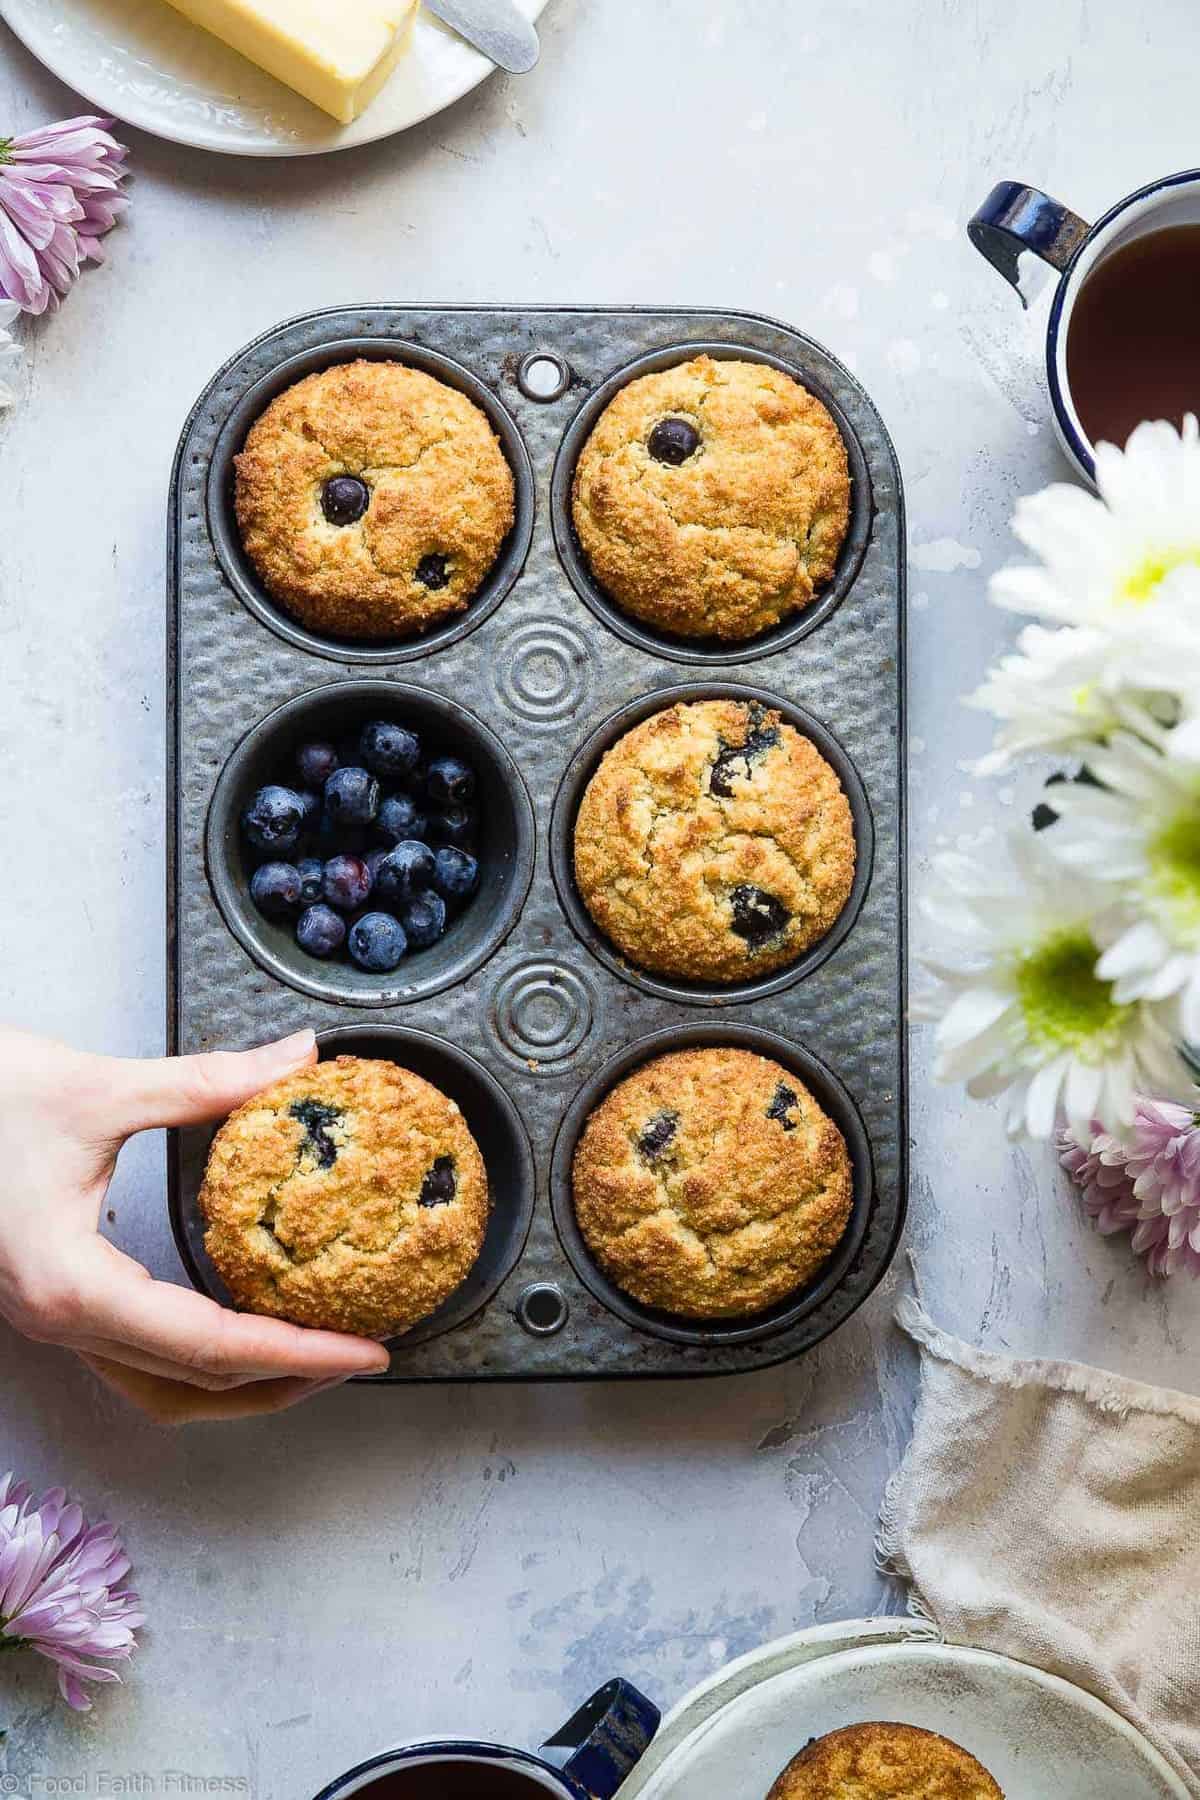 The BEST Low Carb Sugar Free Keto Blueberry Muffins - SO moist and tender, you'll never believe they are gluten/grain/dairy/sugar free and keto friendly! Perfect for breakfast or snacks for kids OR adults! | #Foodfaithfitness | #Lowcarb #Healthy #Glutenfree #Keto #Sugarfree